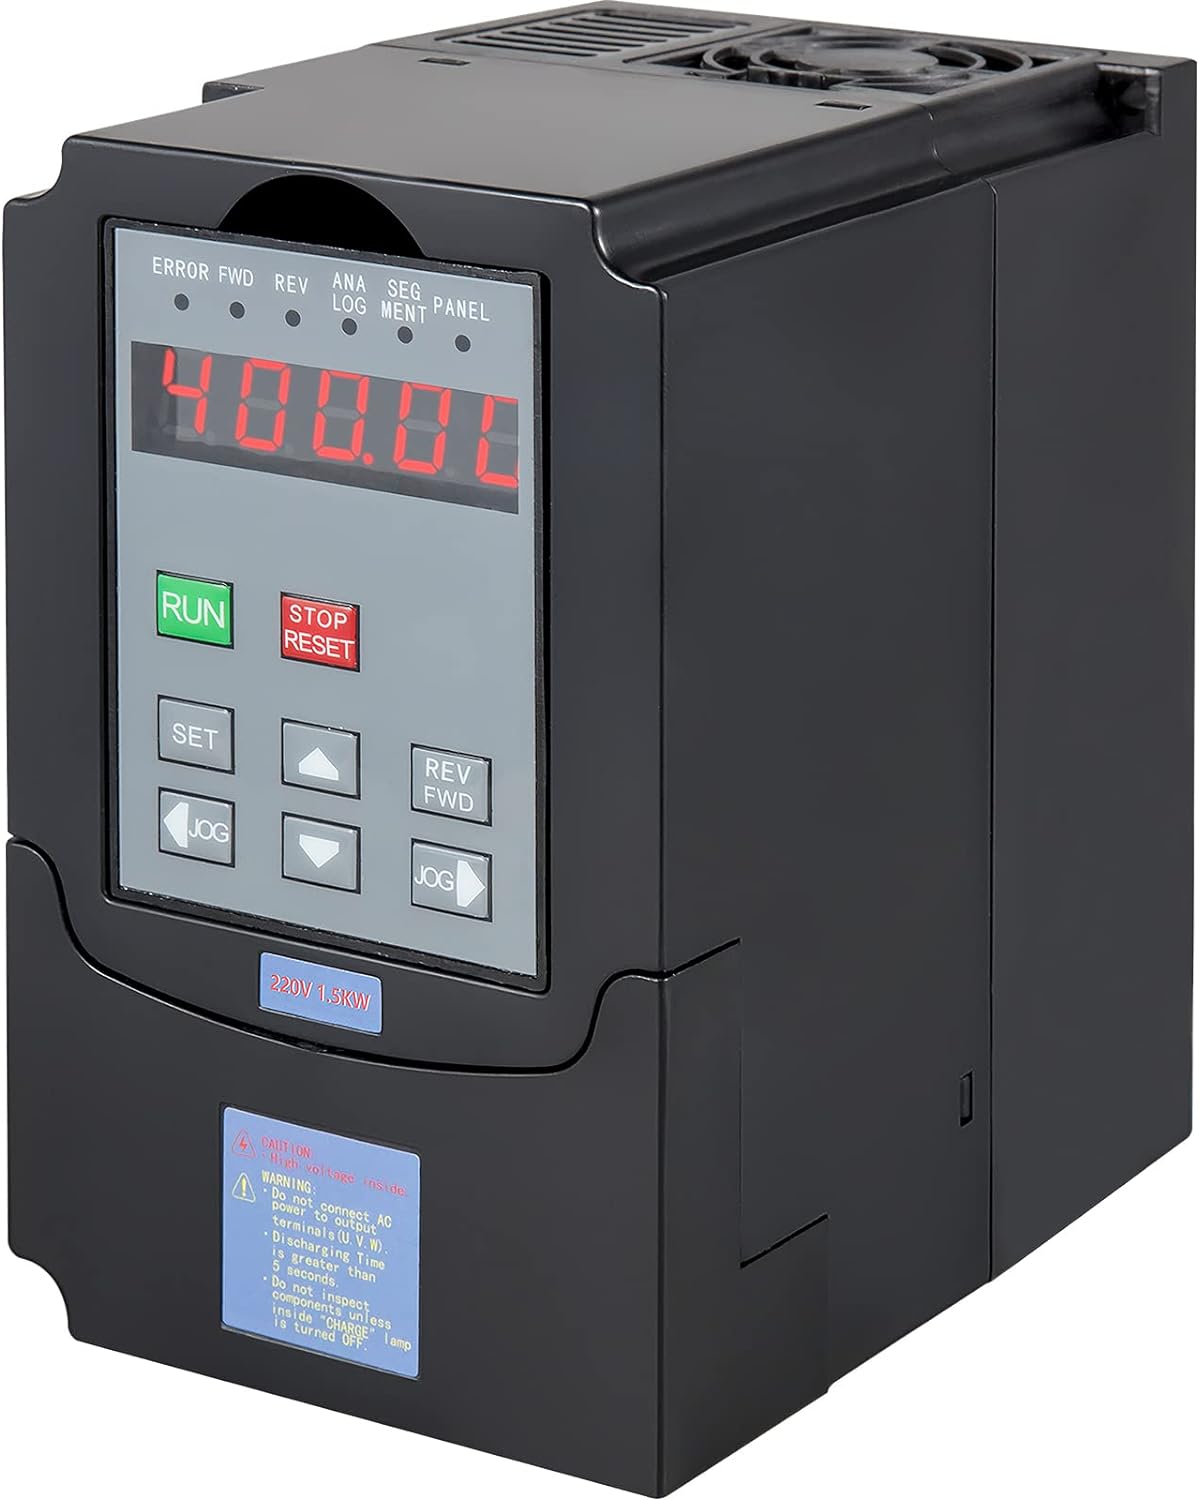 CNC VARIABLE FREQUENCY DRIVE INVERTER VFD 2.2KW 110V 